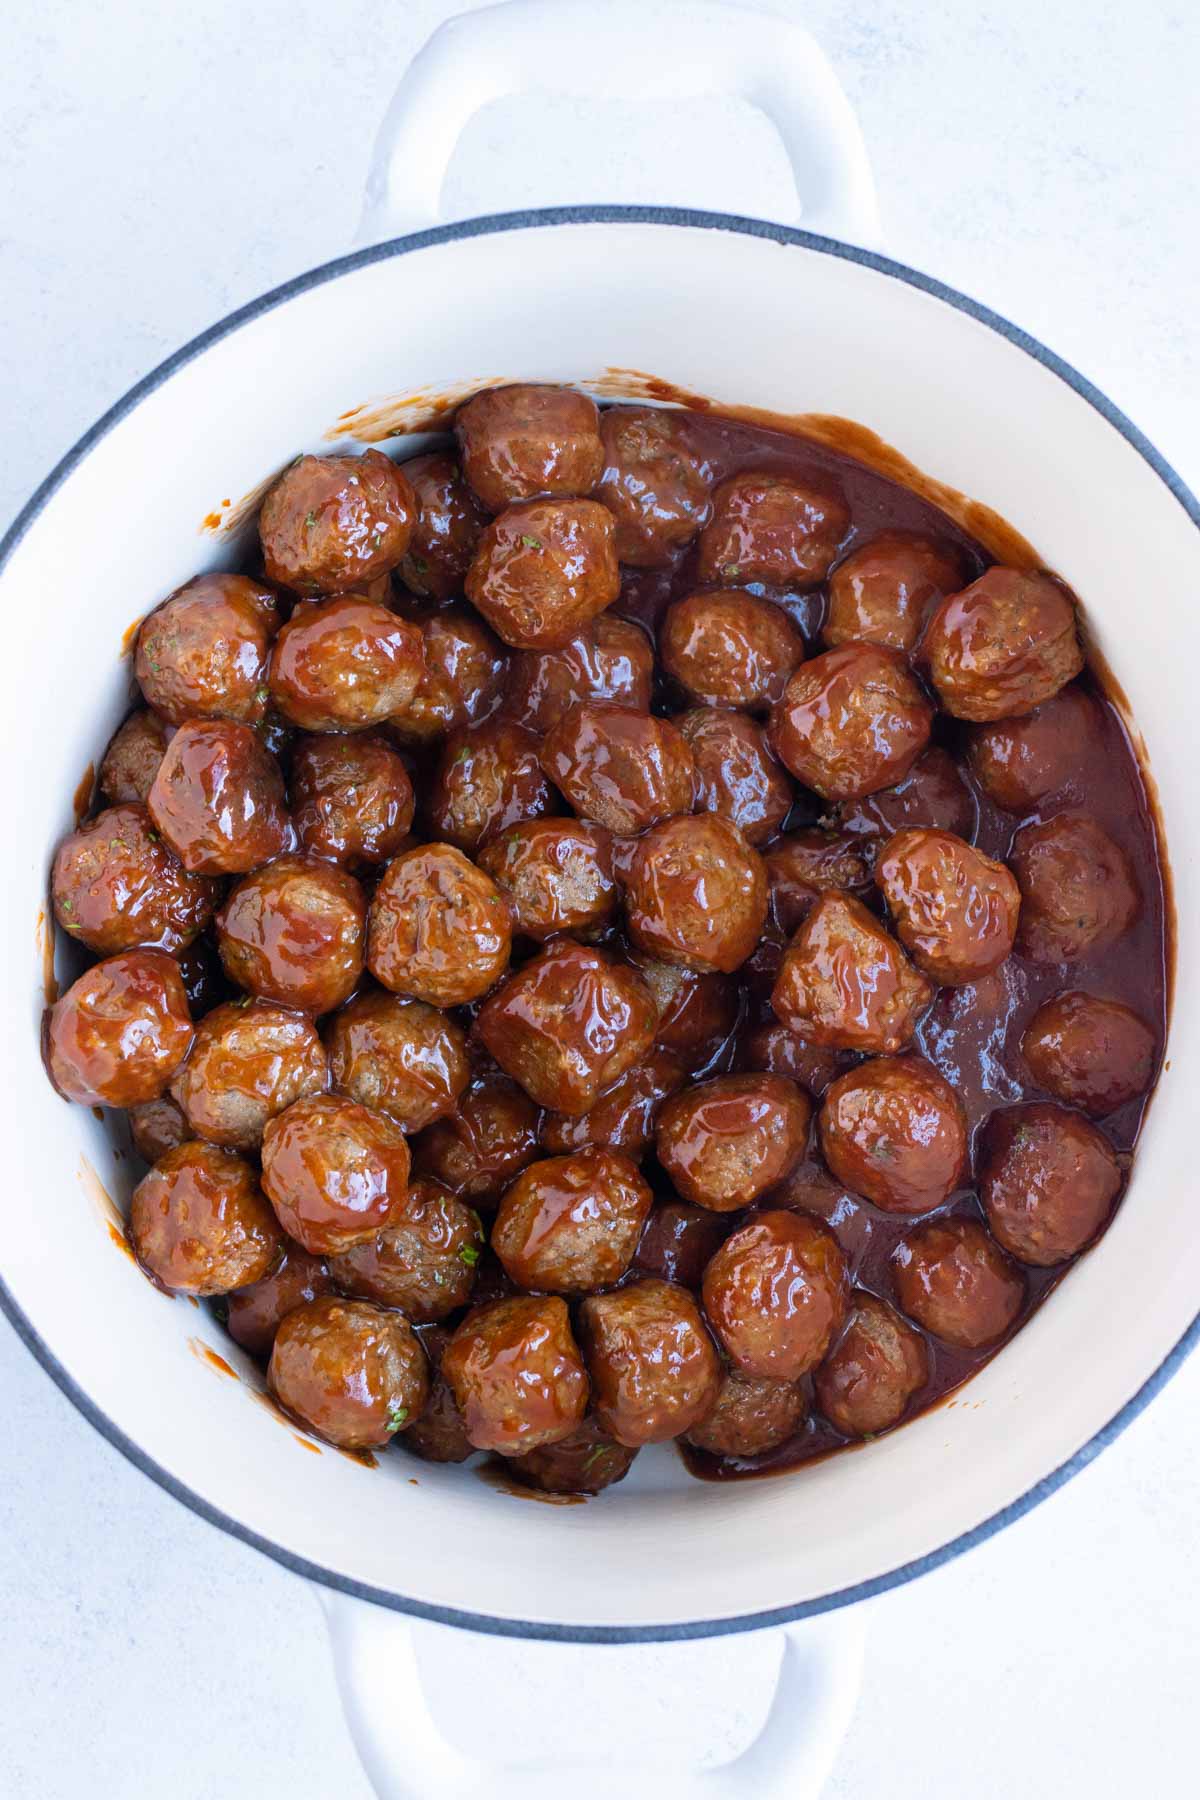 Gluten-Free Grape Jelly meatballs are made with just a few ingredients.